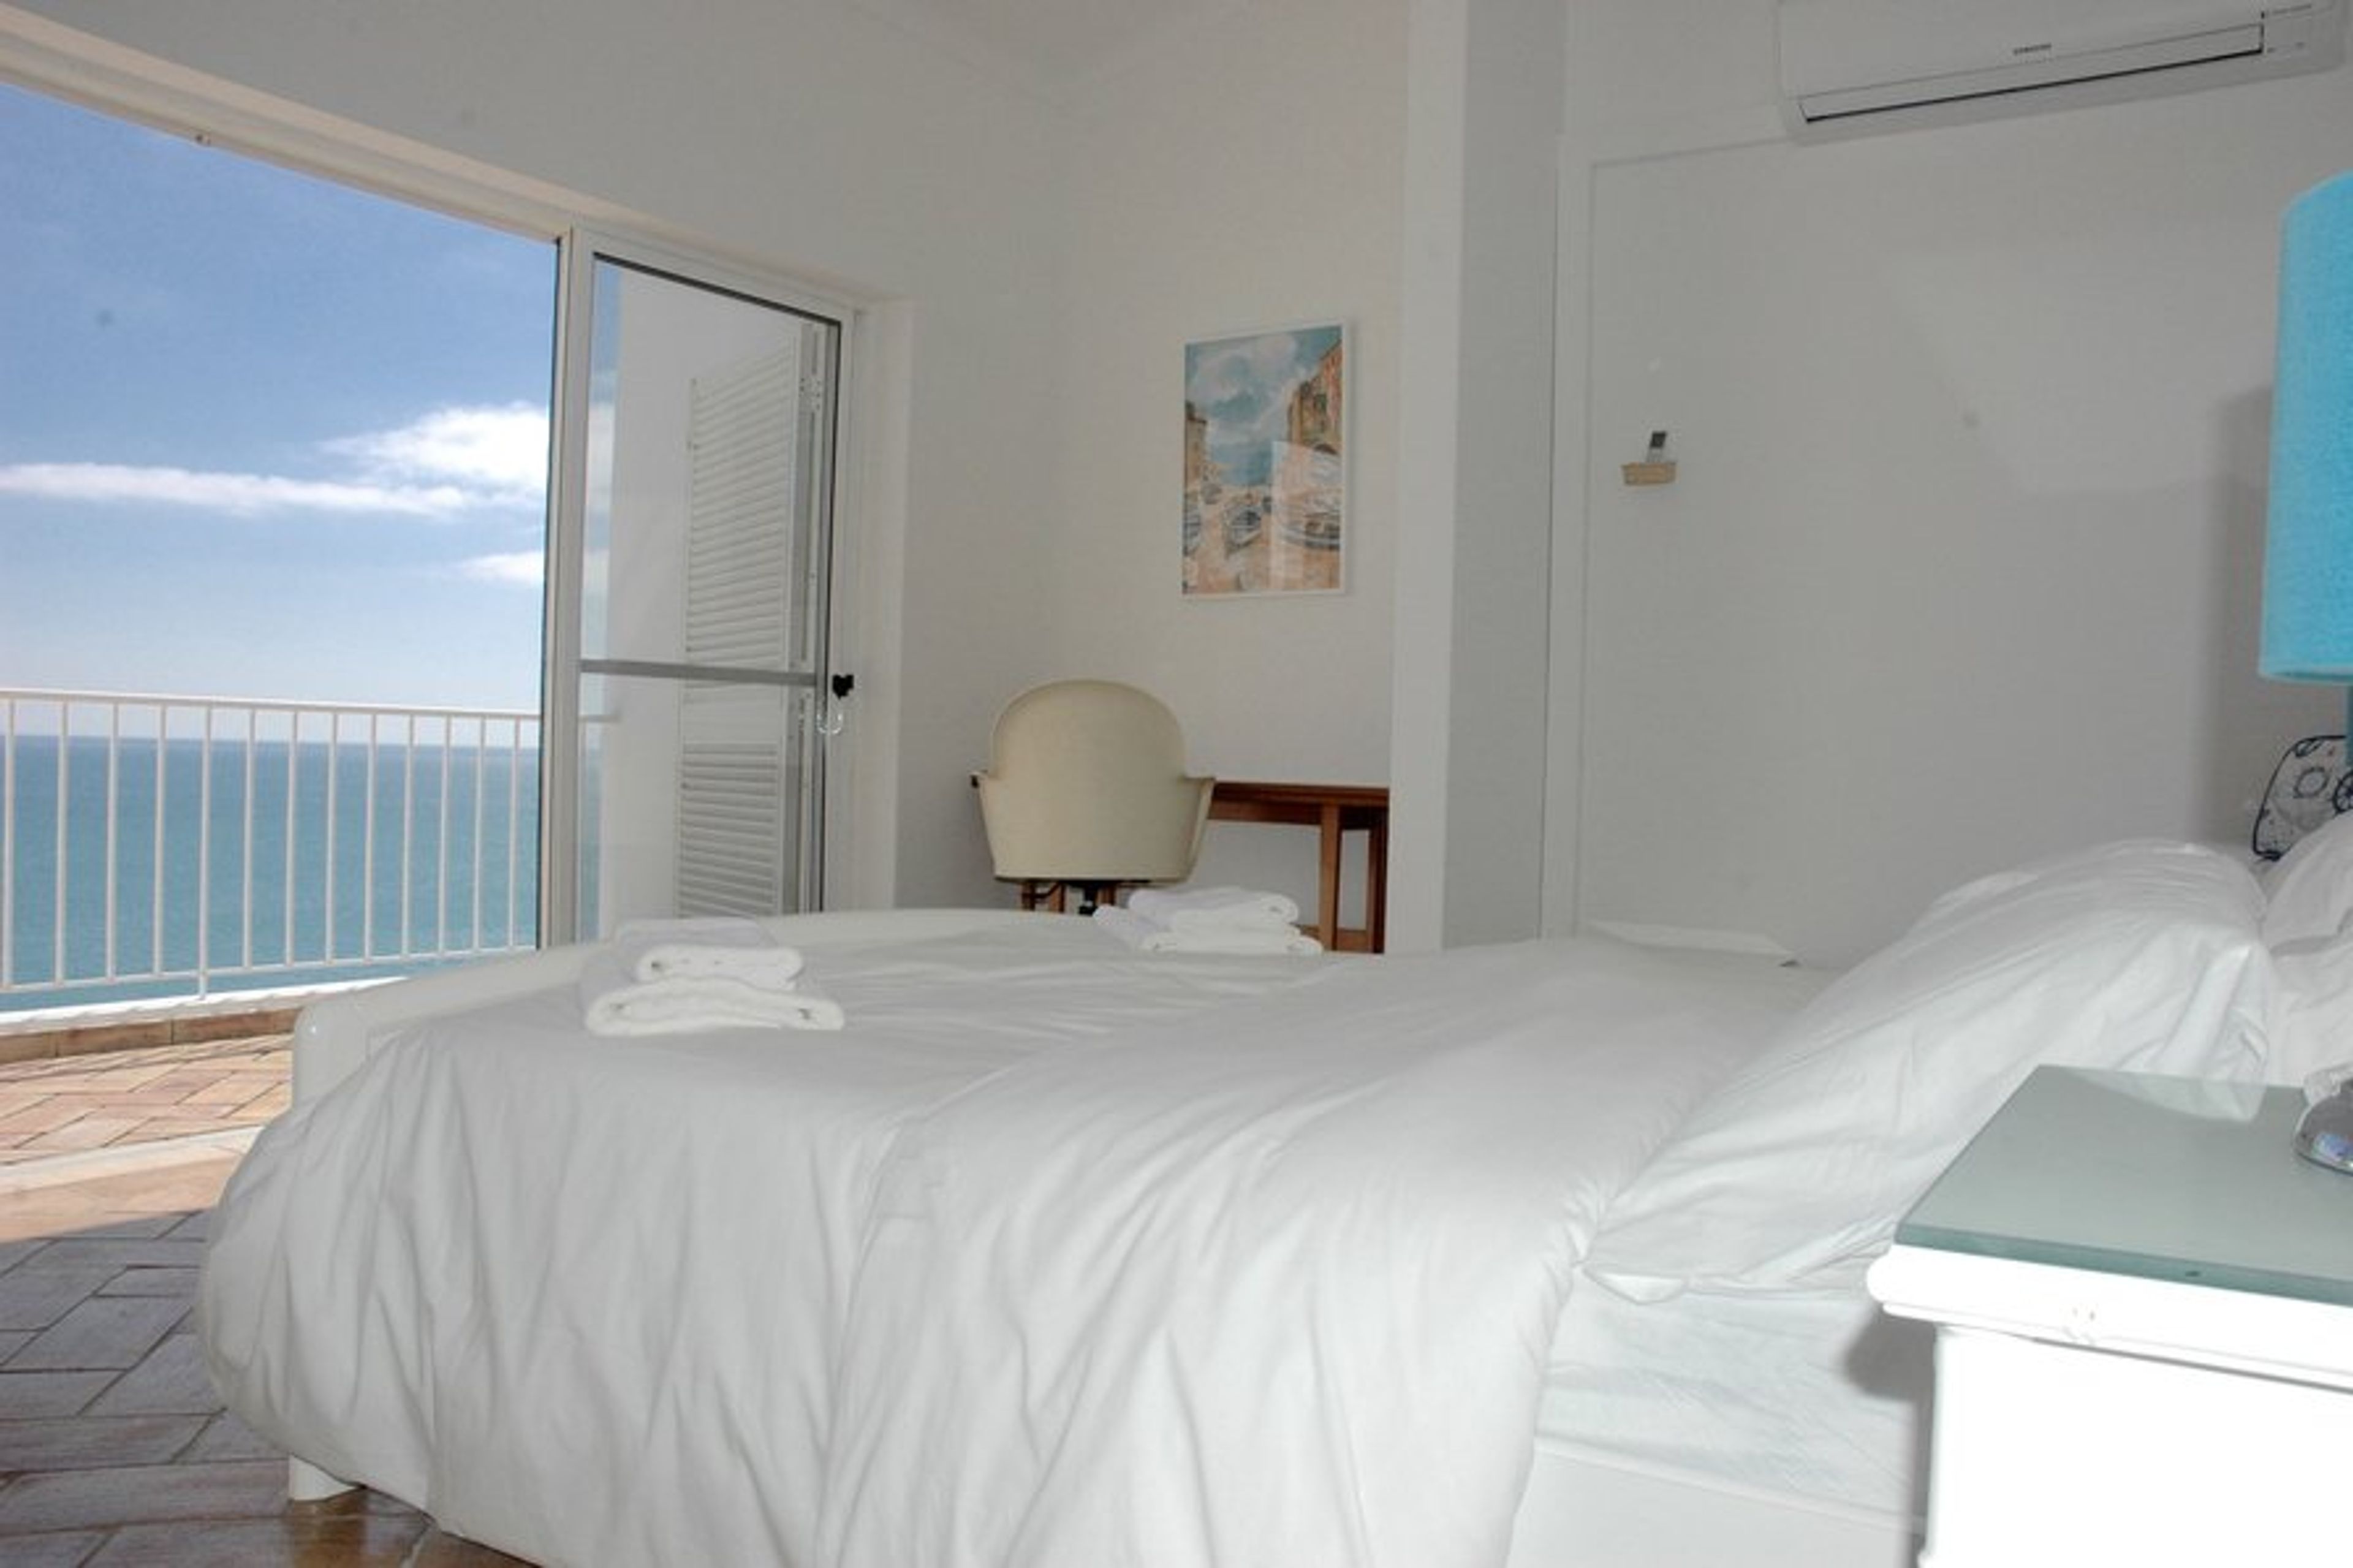 En-suite master bedroom with an incredible view to wake up to